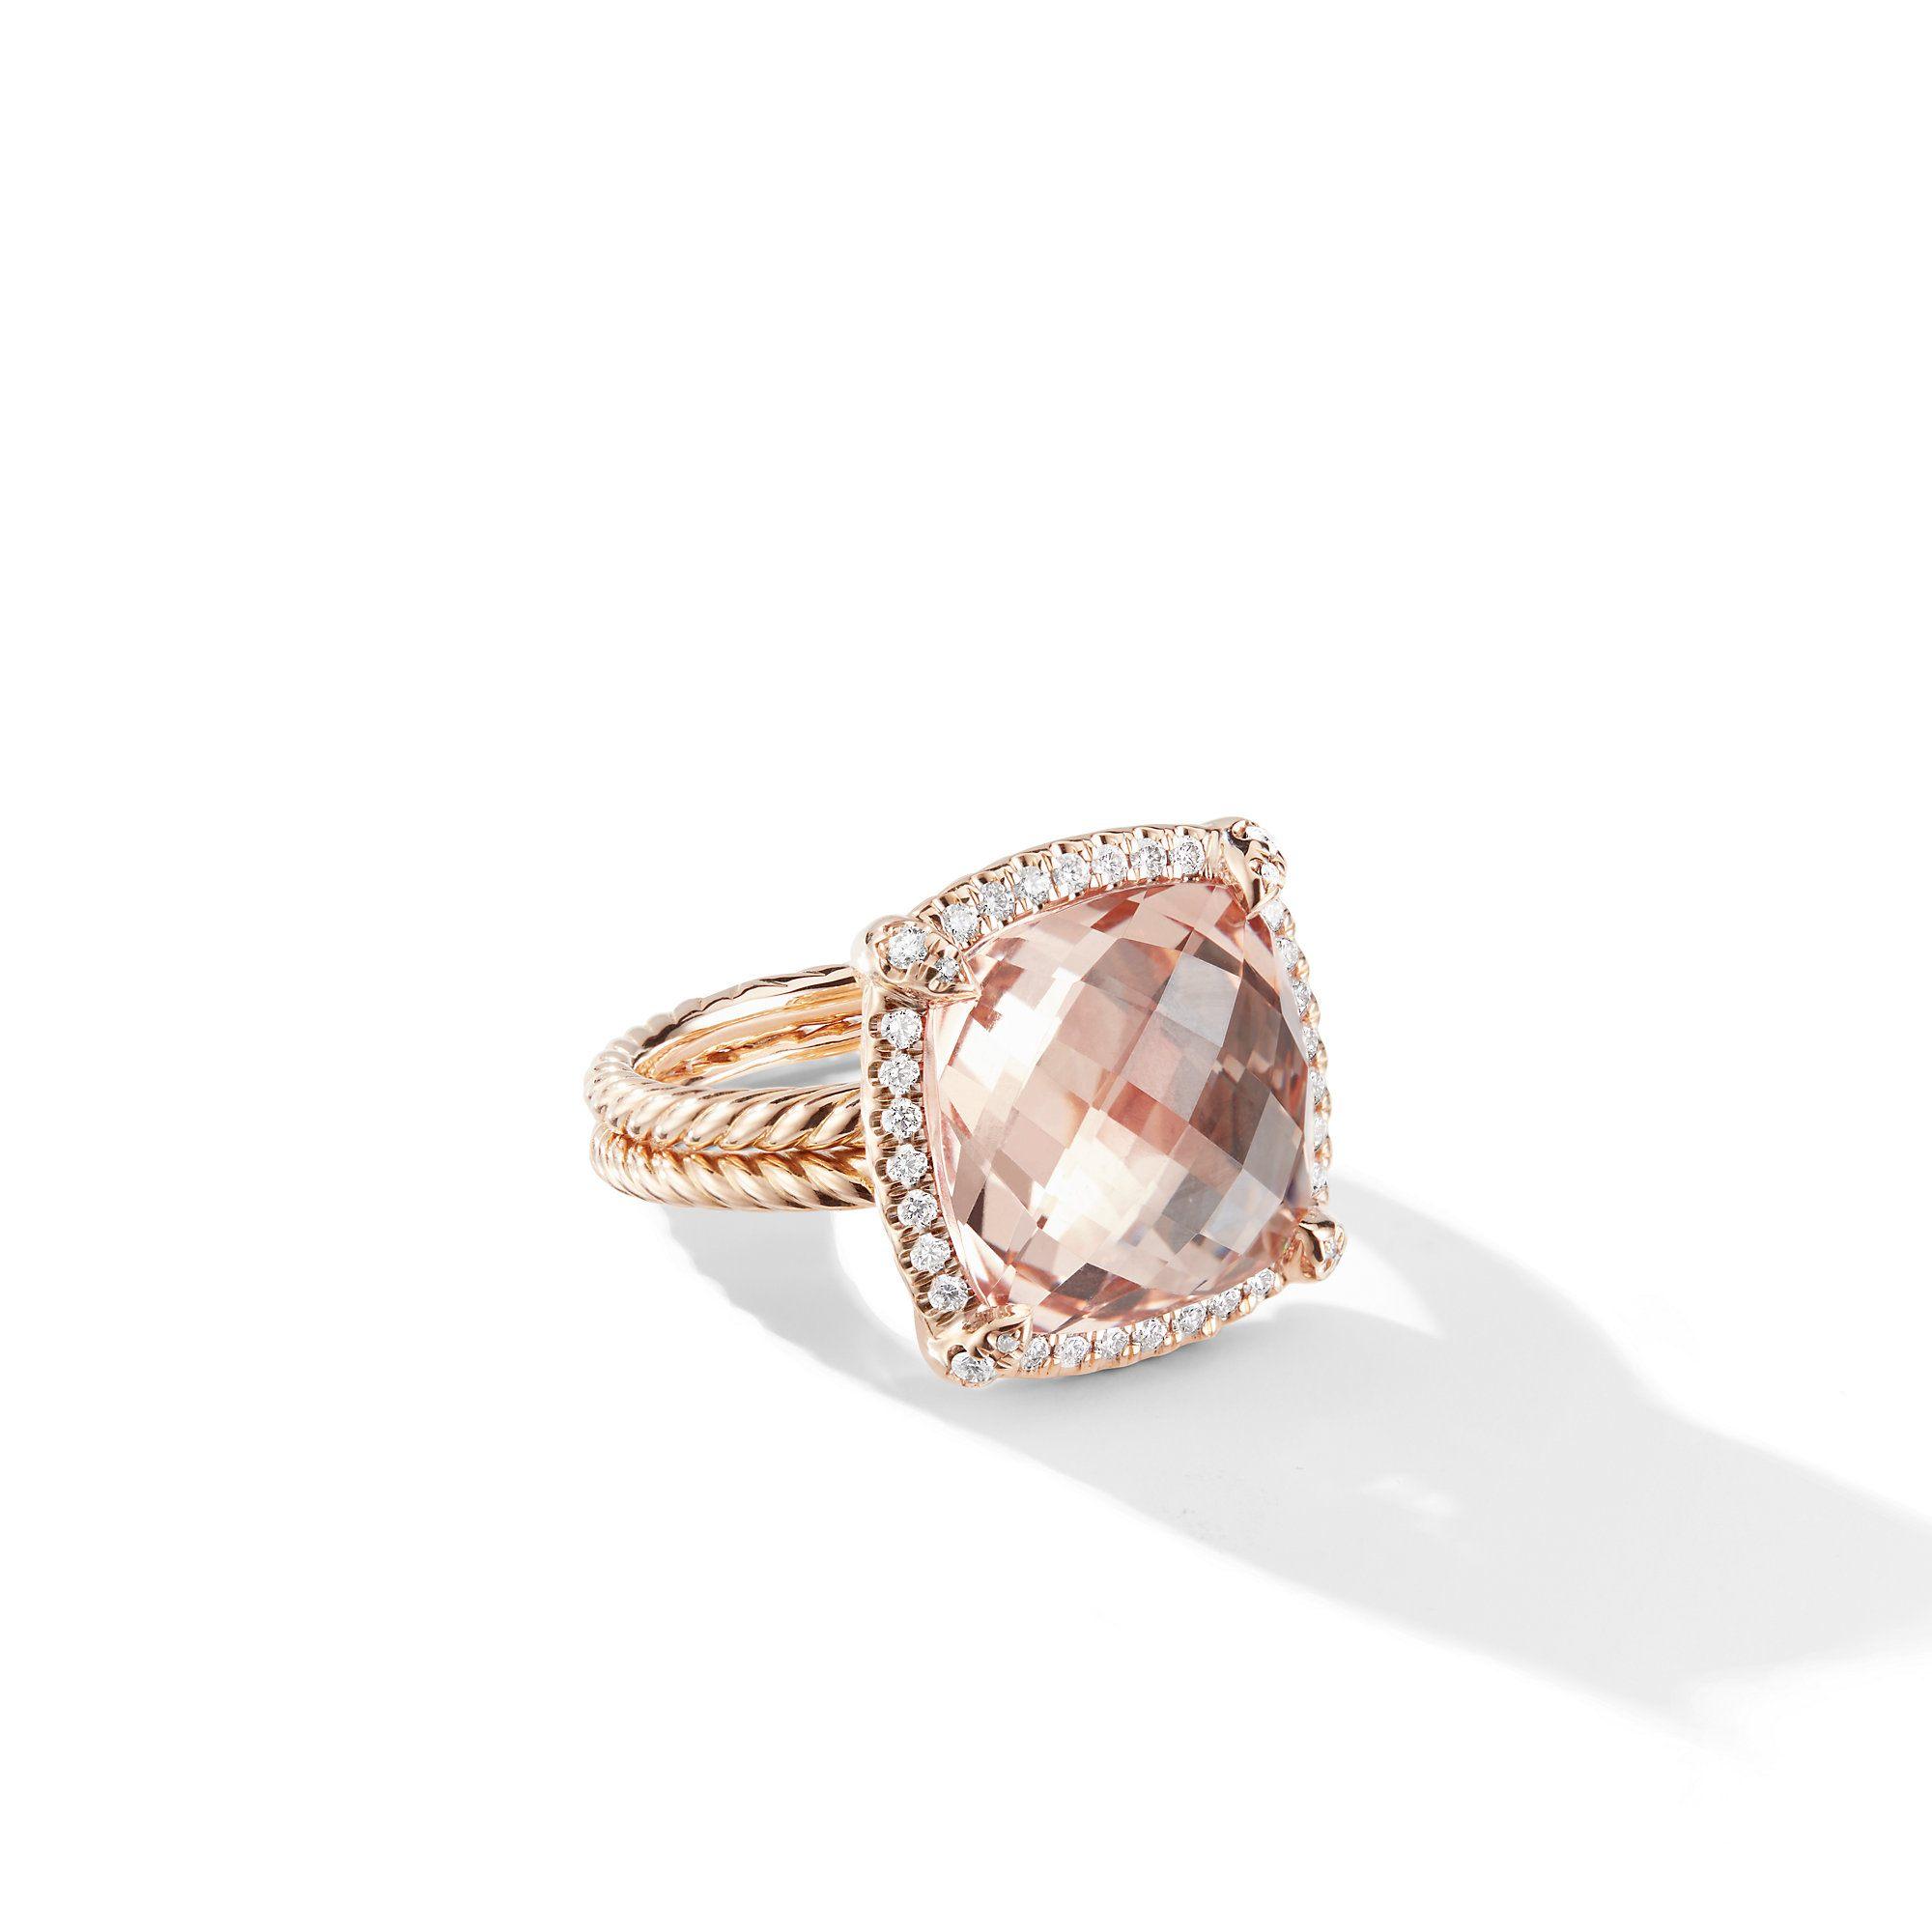 David Yurman Chatelaine Pave Bezel Ring in 18K Rose Gold with Morganite and Diamonds 0